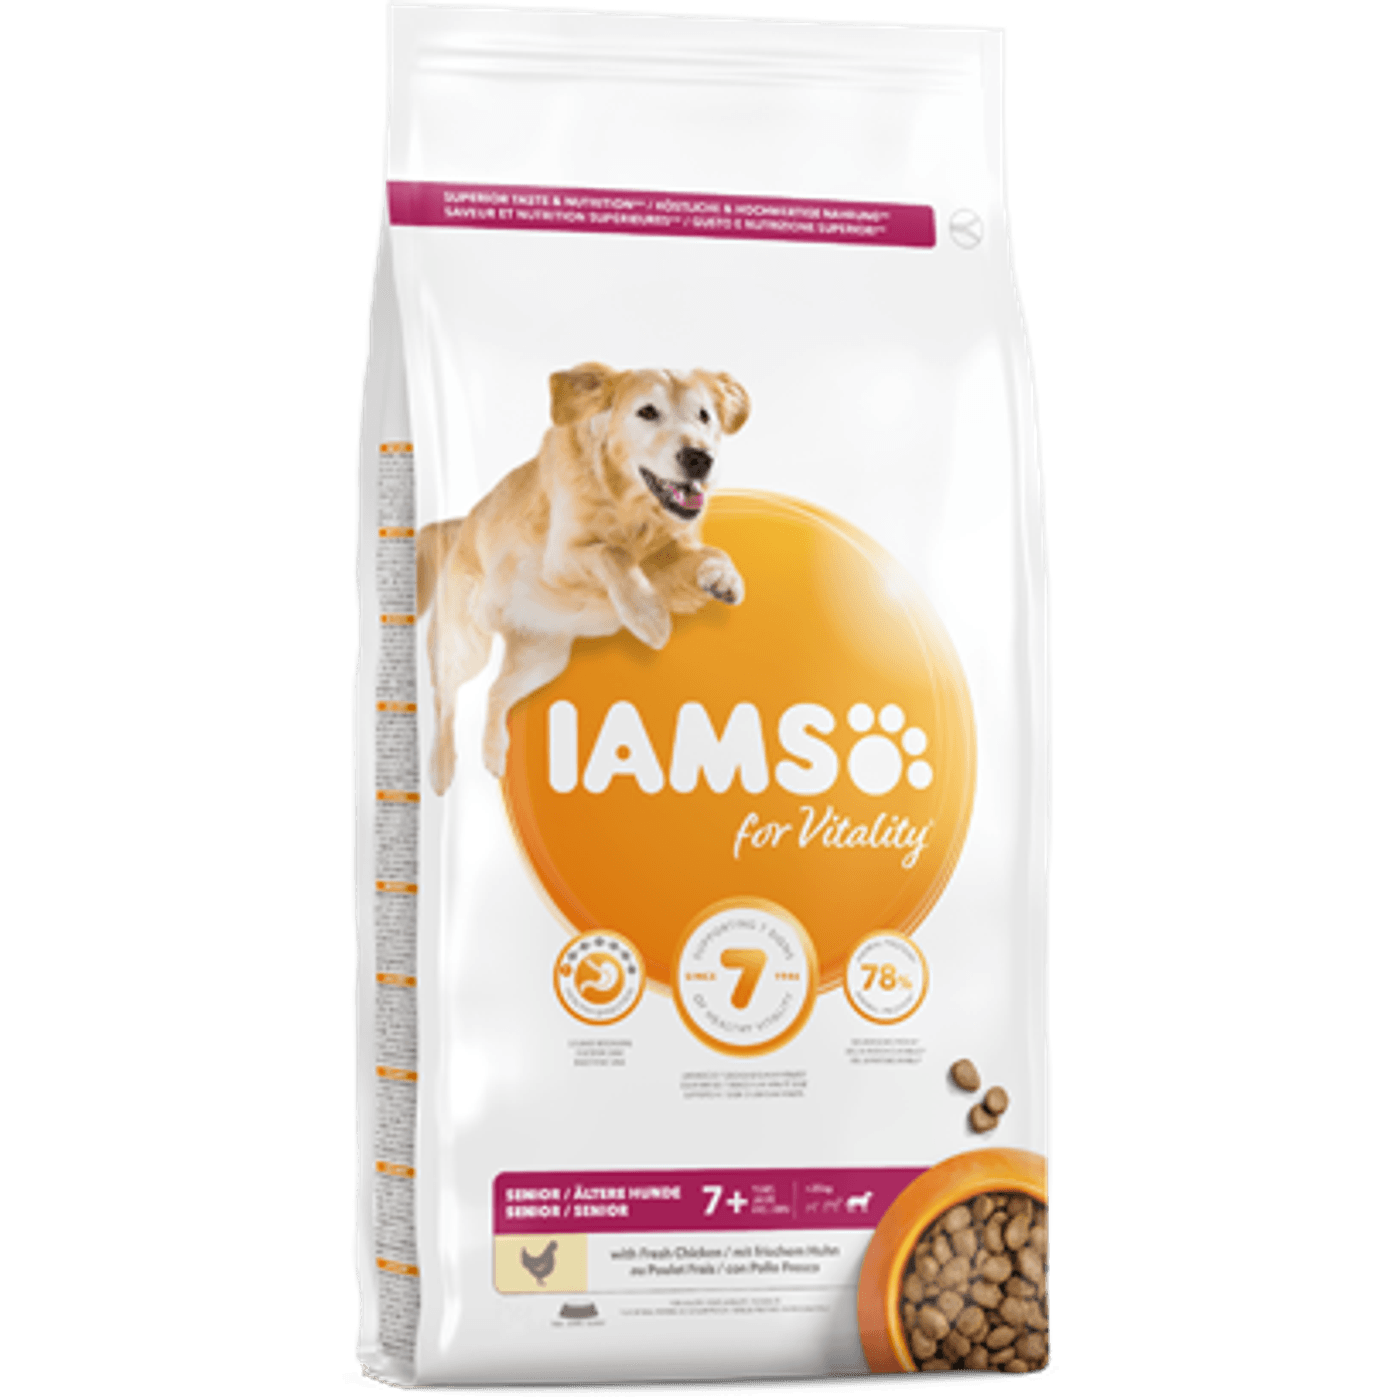 Iams-for-Vitality-Senior-Large-Breed-Dog-Food-with-Fresh-Chicken